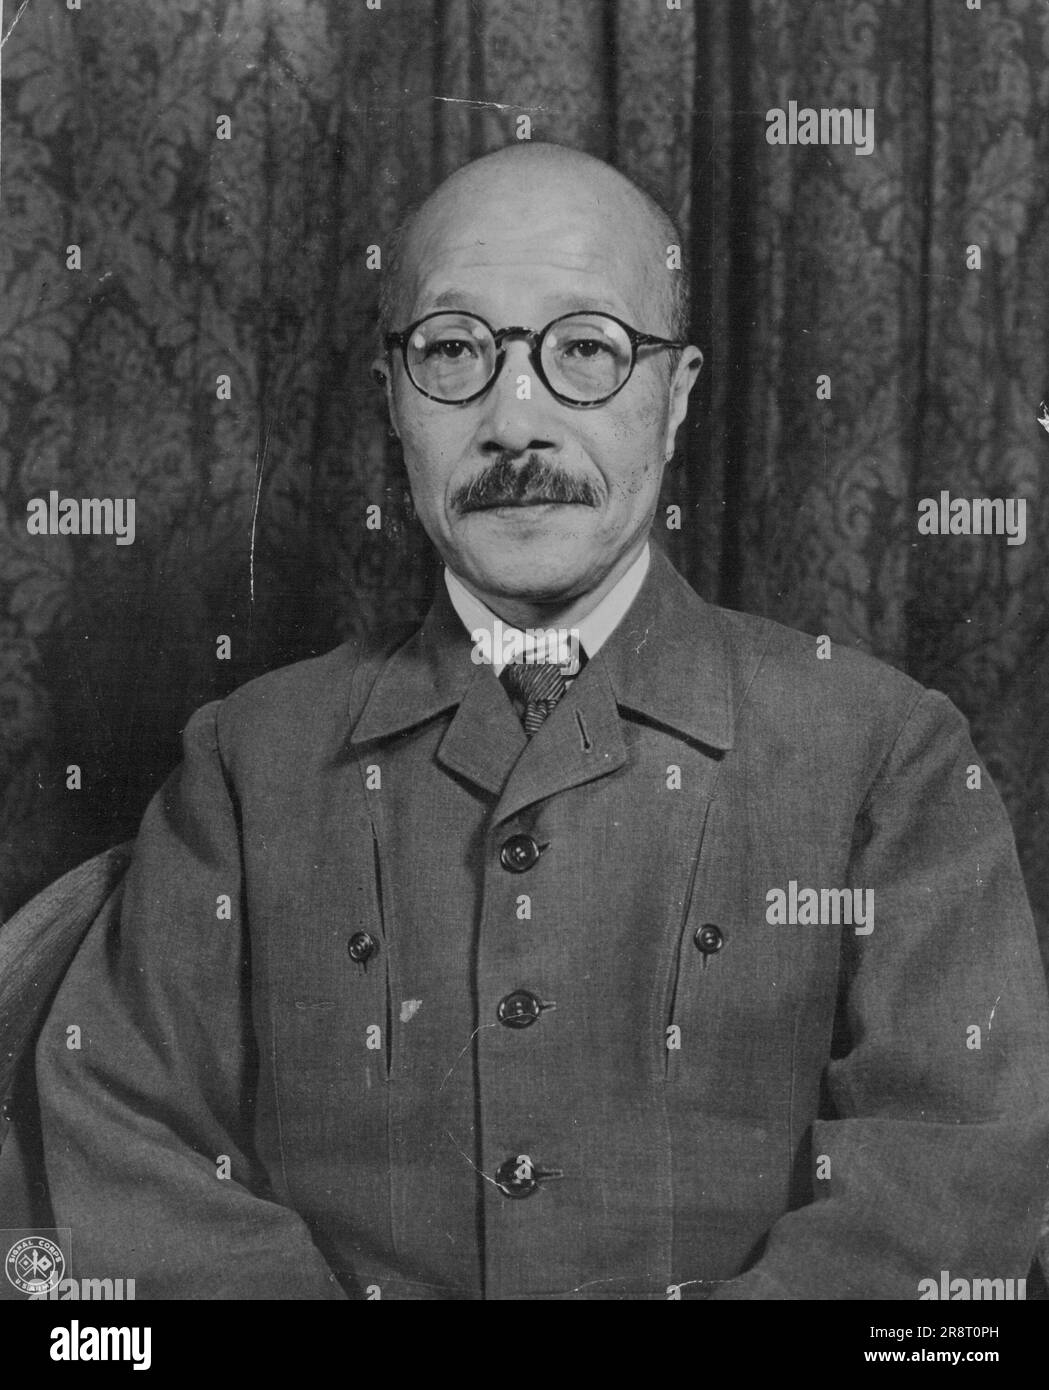 Alleged Major Japanese War Criminal -- Hideki Tojo, Former General, premier and war Minister from December 2, 1941 to July, 1944, is one of the 25 alleged Major Japanese war criminals on trial at the international military tribunal for the Far East in Tokyo, Japan. Hideki Tojo... 'I feel I did no wrong'. August 25, 1947. (Photo by McDonald, U.S. Army Signal Corps). Stock Photo